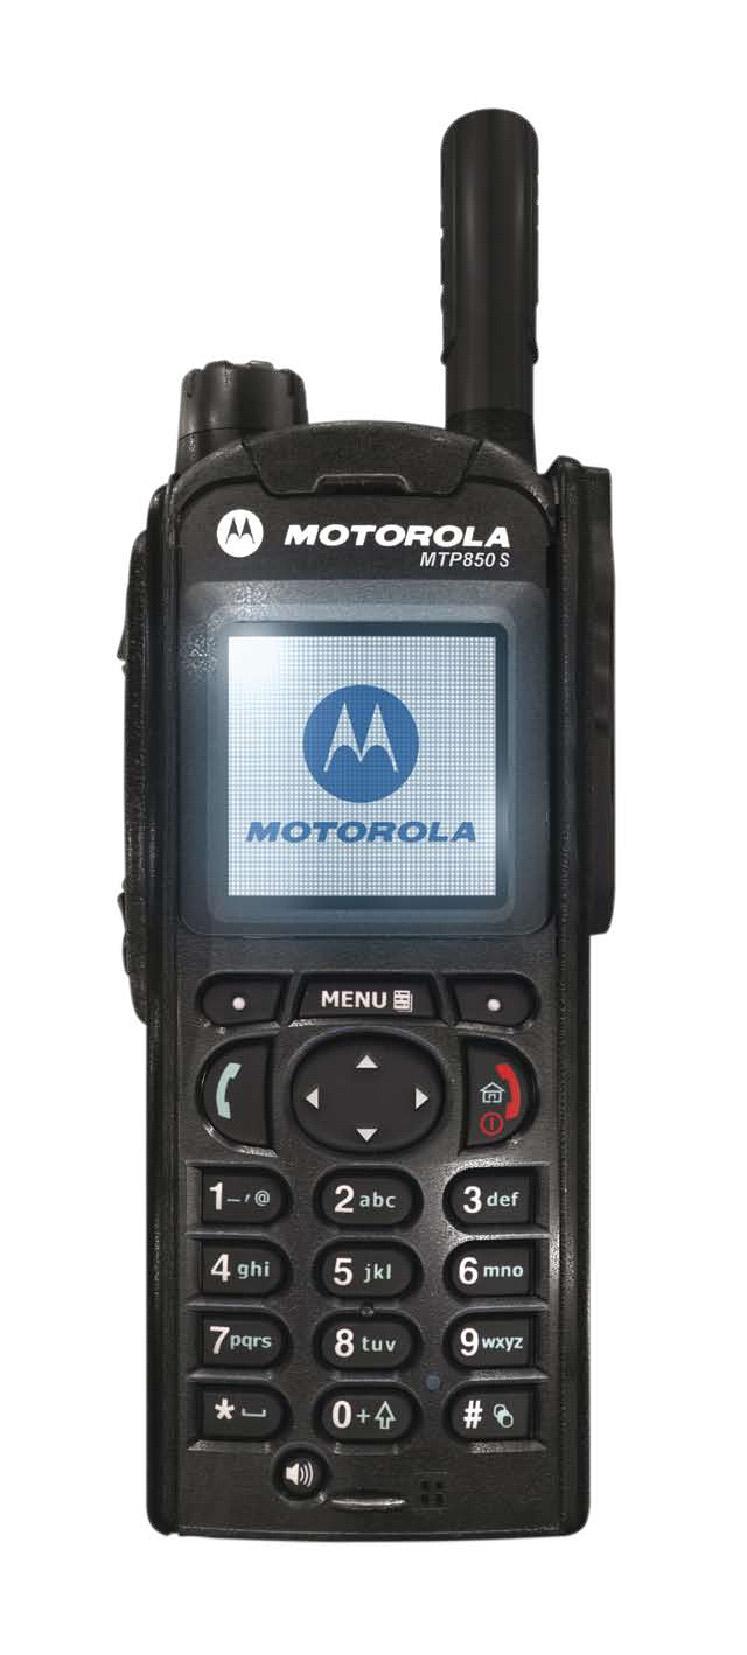 15 Product Overview Chapter 1 Product Overview MTP850 S Overview The MTP850 S is Motorola TETRA portable radio for mission critical communications.